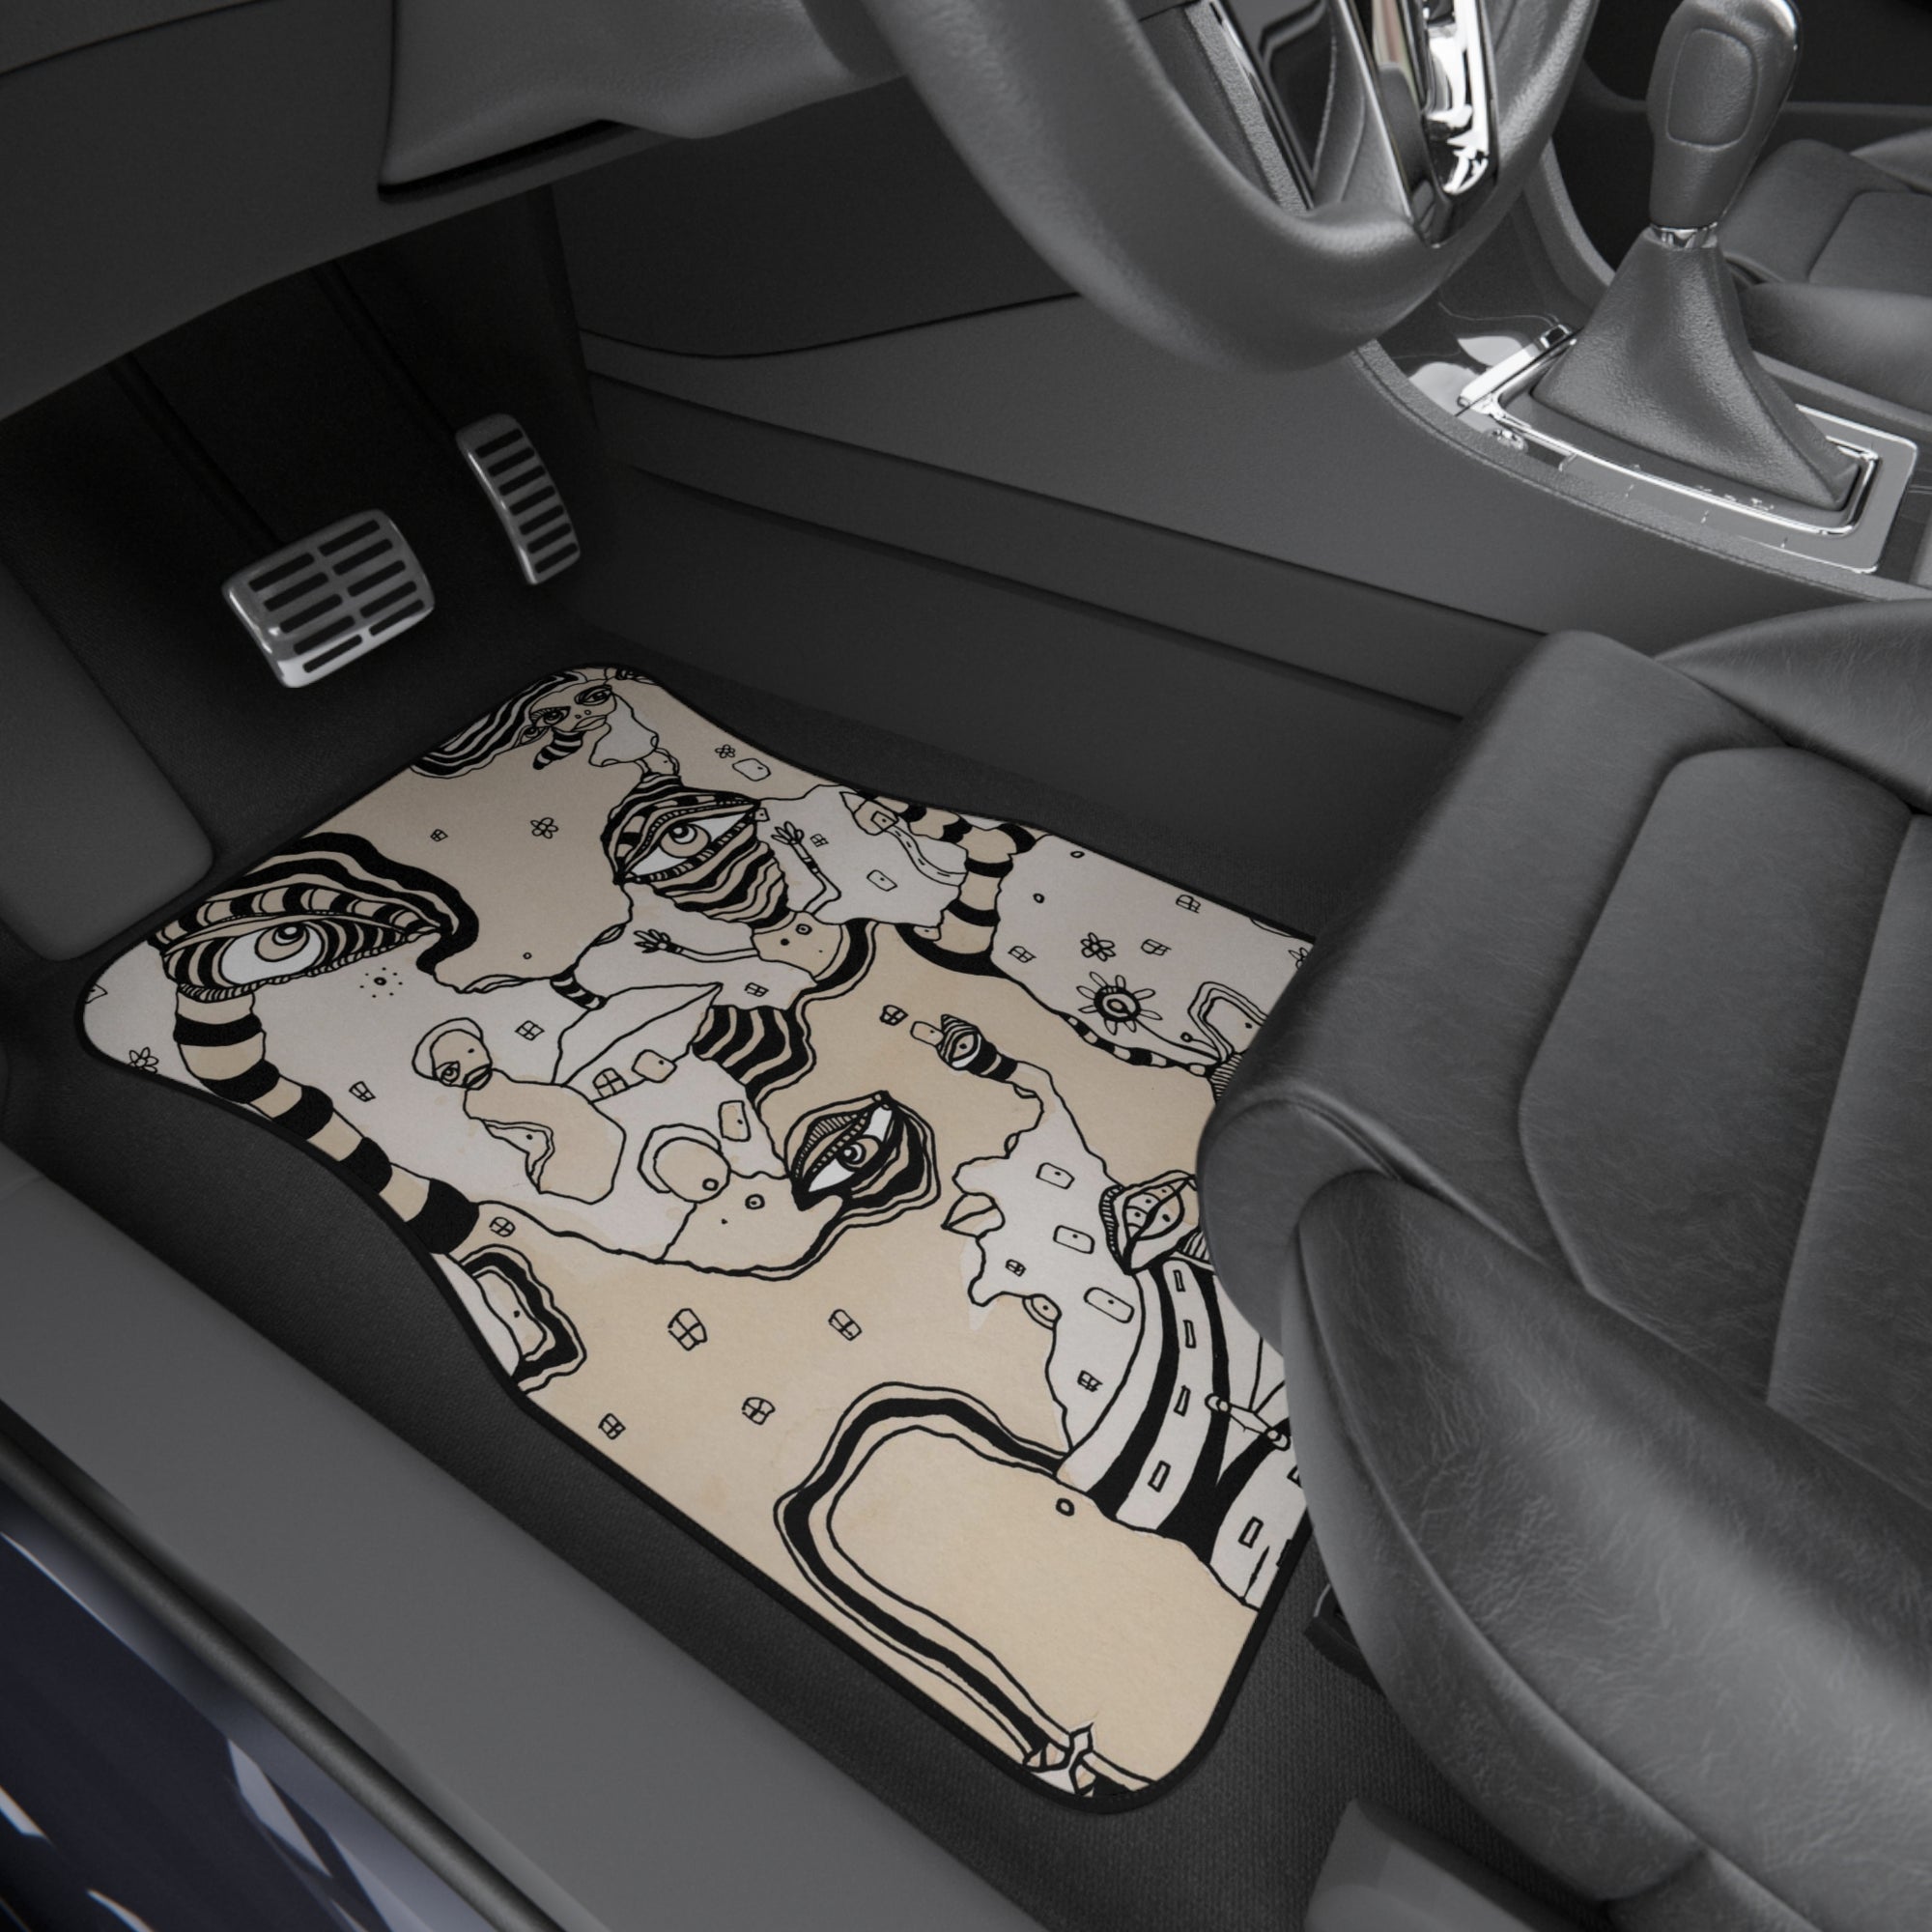 "Stained 01" Car Floor Mats Set of 4 Coffee Stained Art Designer Car Mats